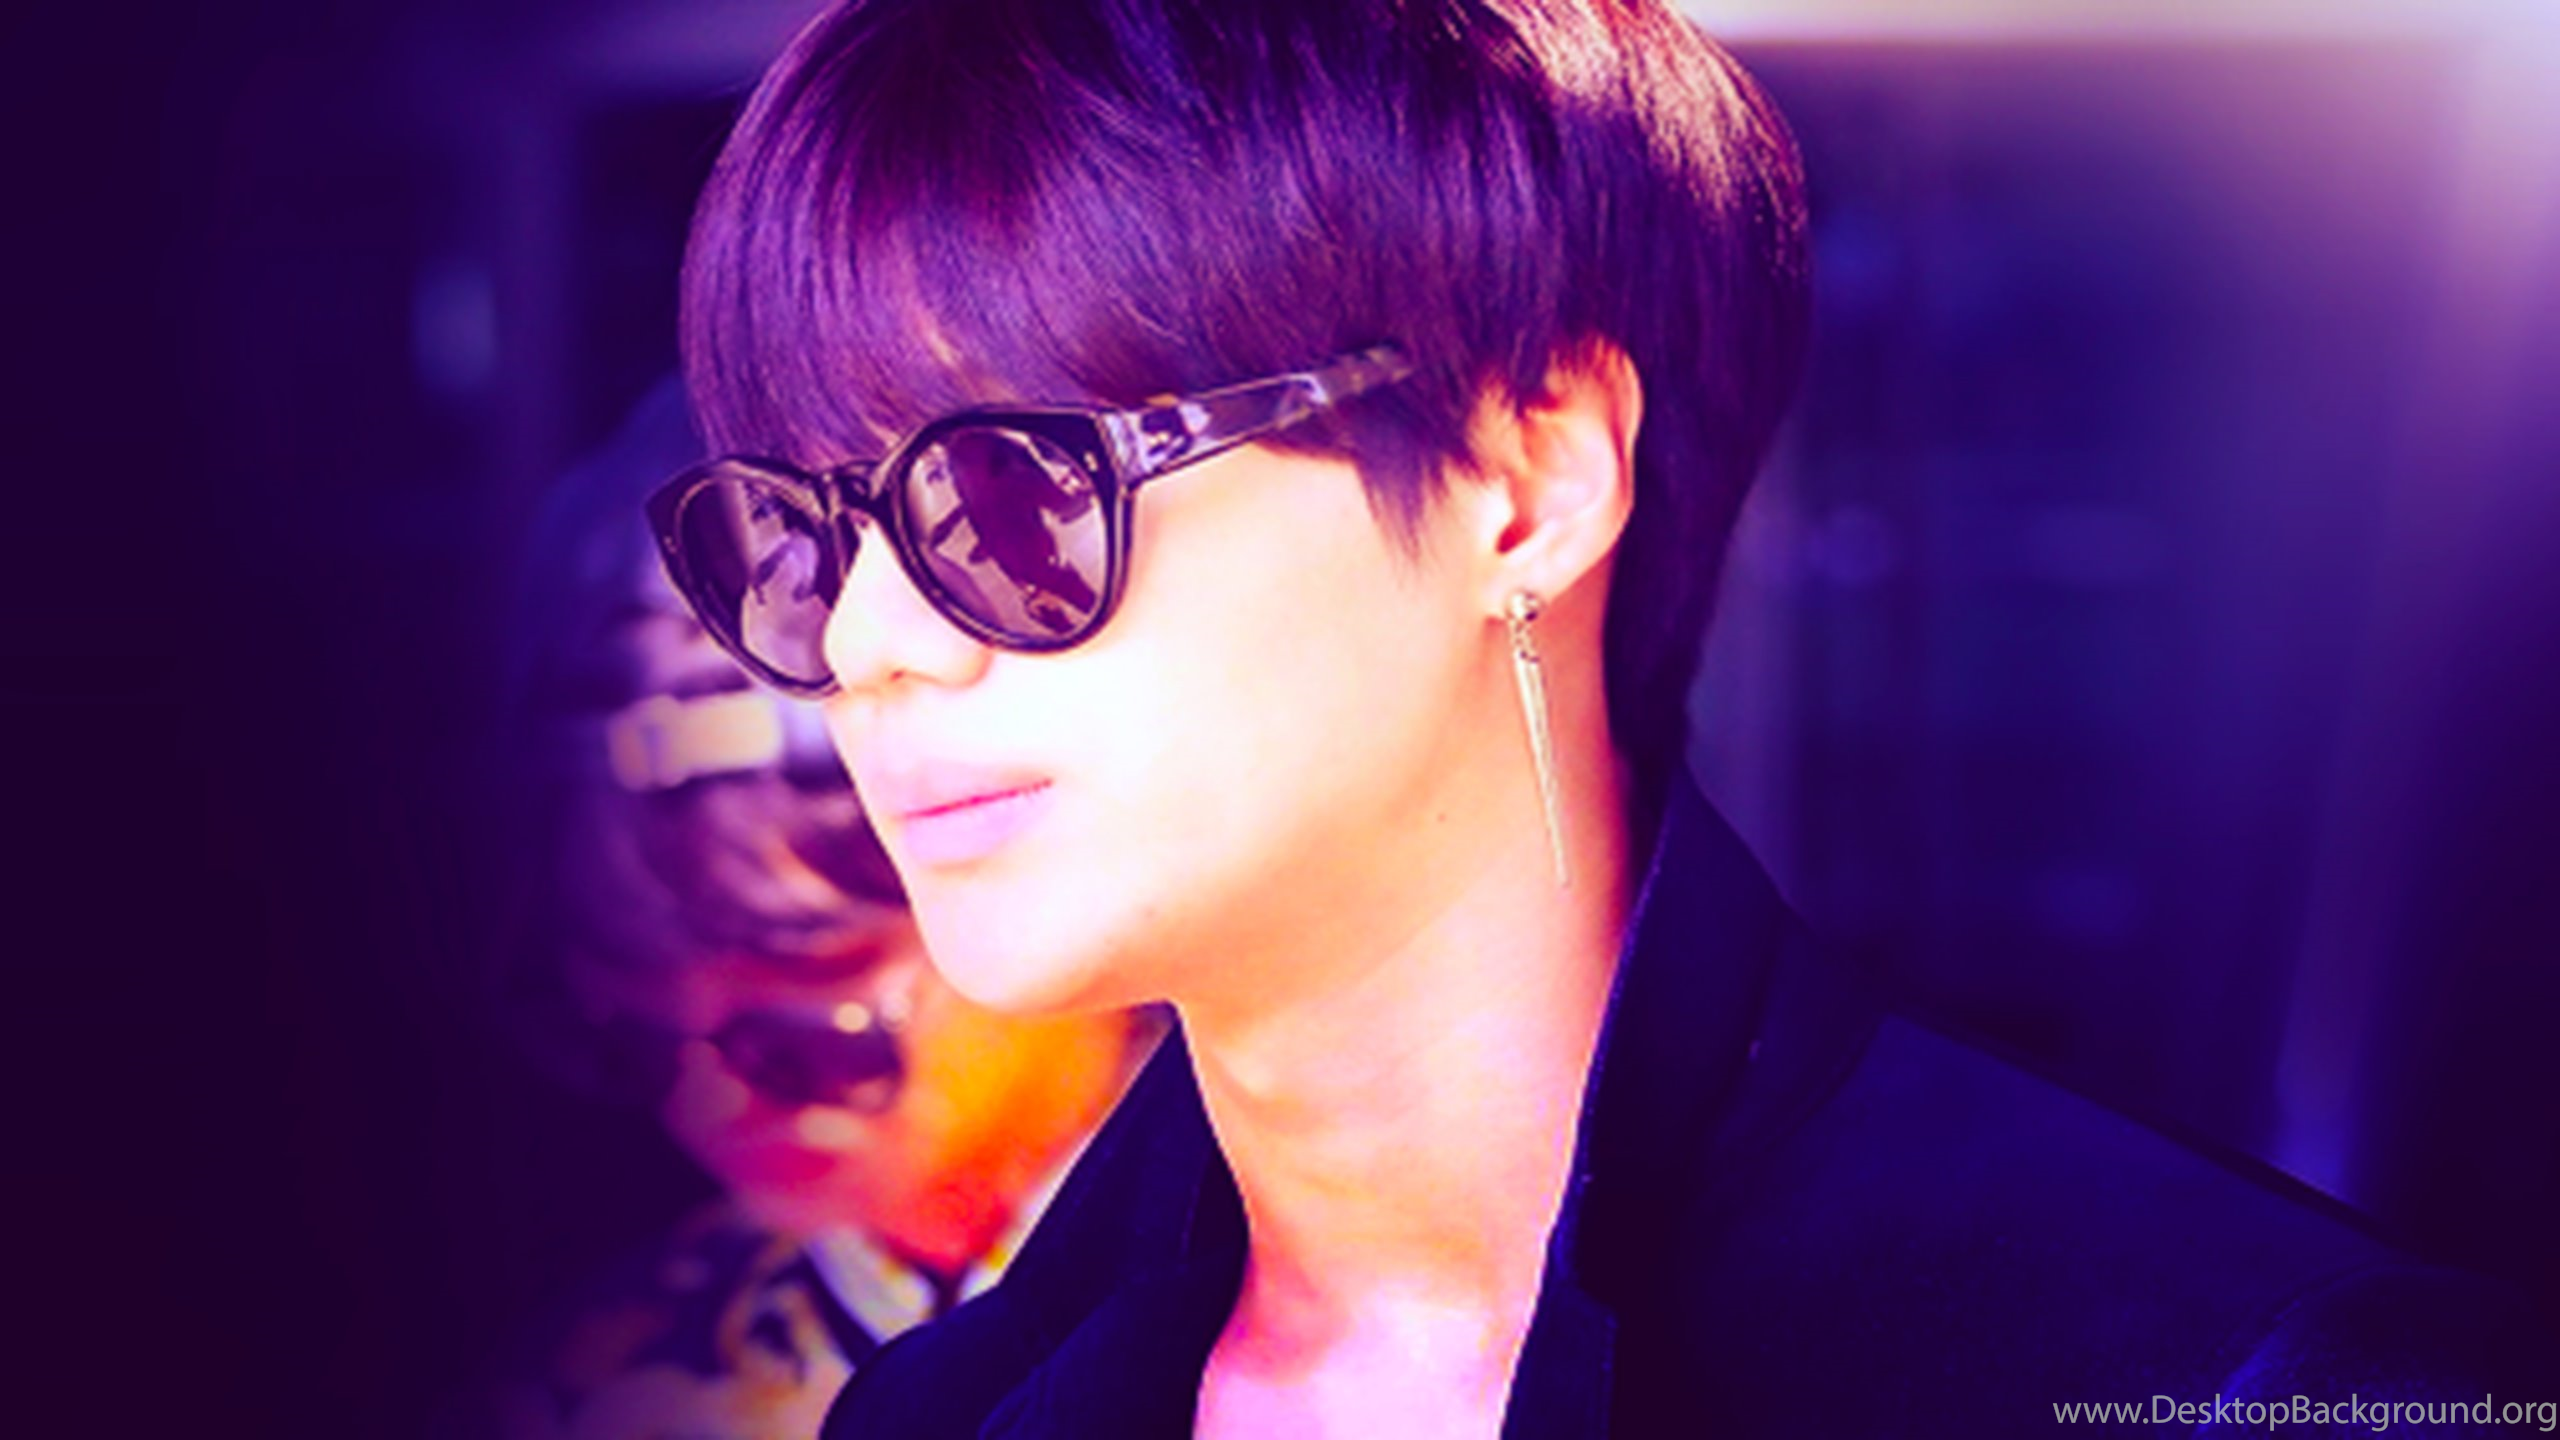 Fashionista Taemin Wallpapers Lee Taemin Wallpapers 36107314 Images, Photos, Reviews